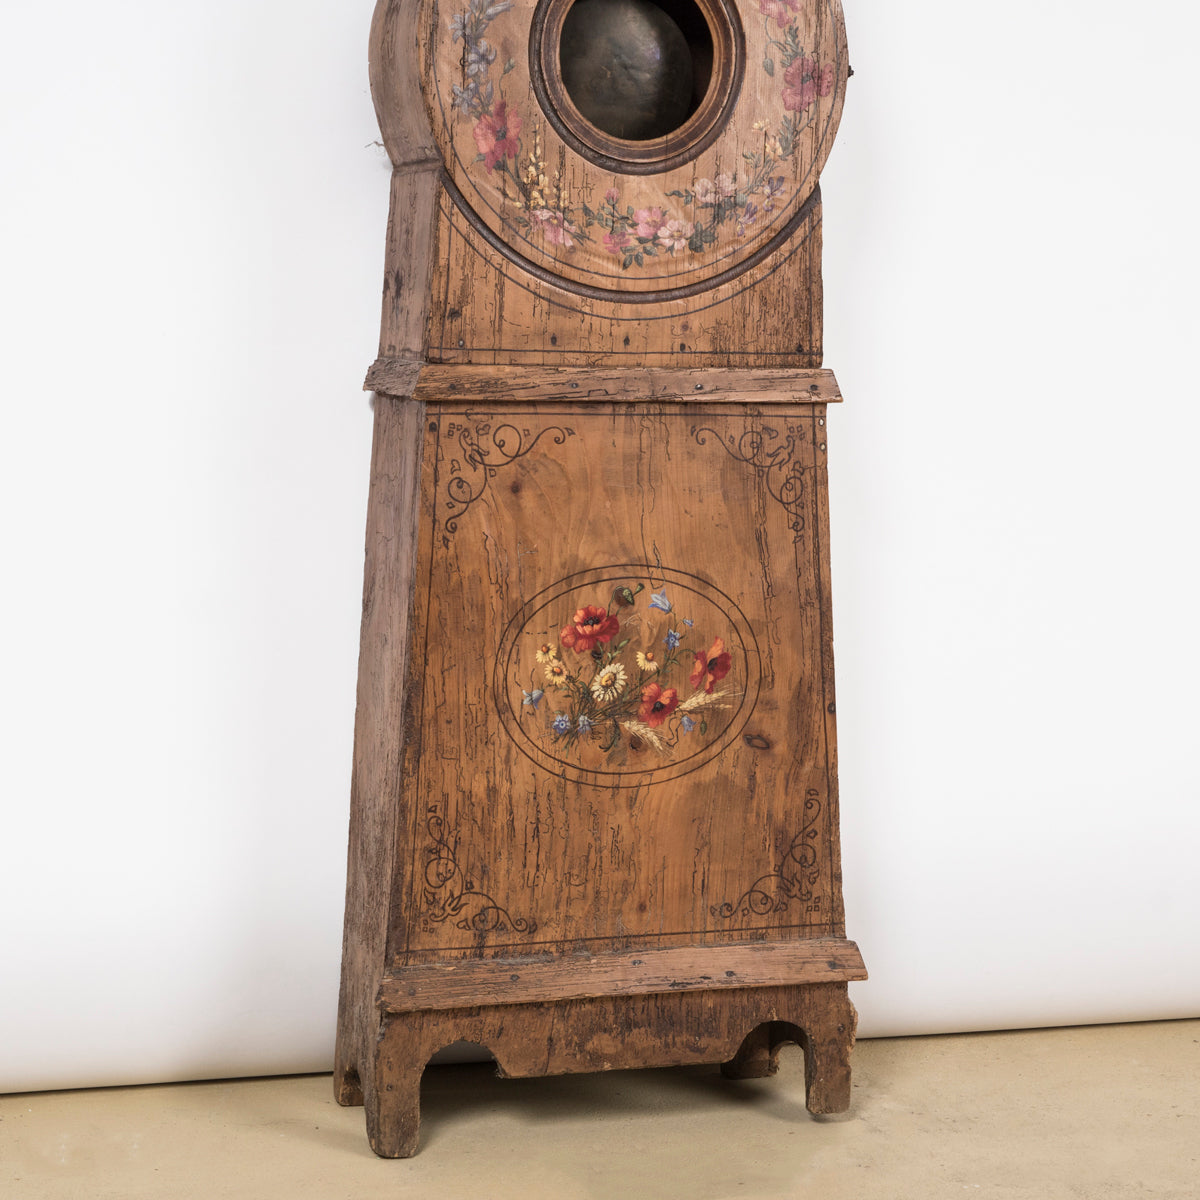 19th C Tall Case or Comtoise Clock